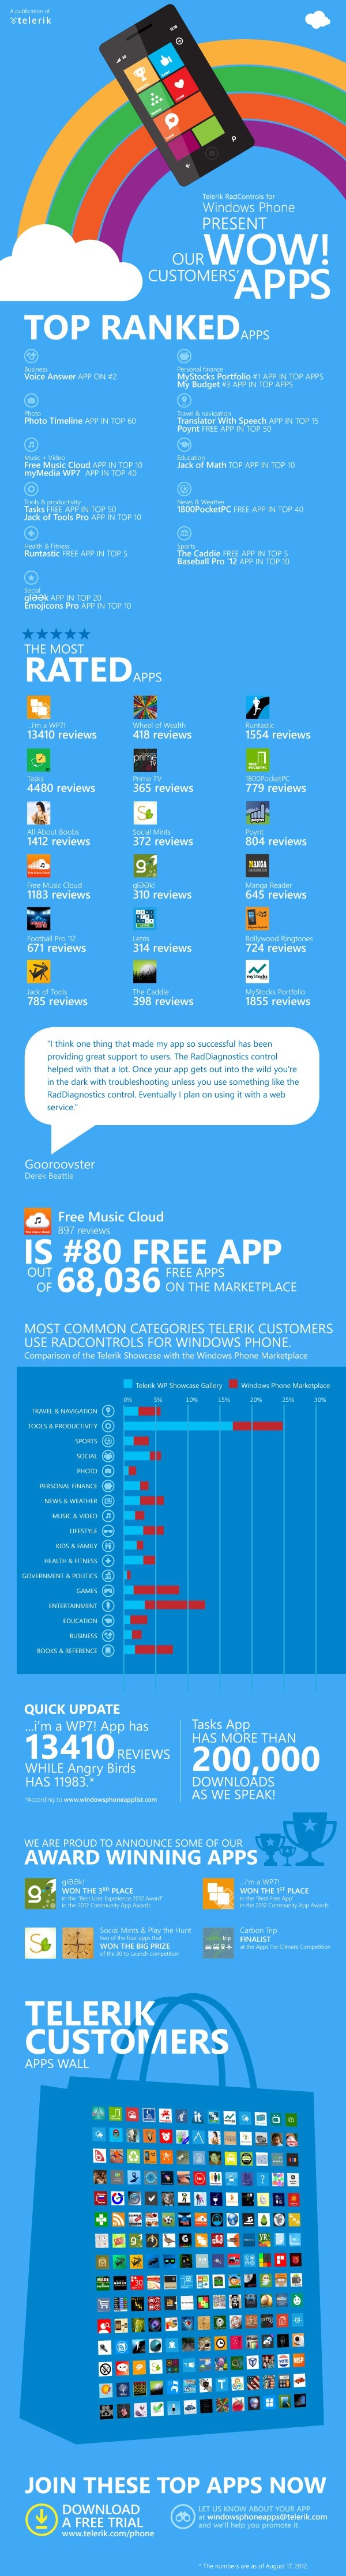 Windows Phone Apps that Rule the Marketplace Infographic